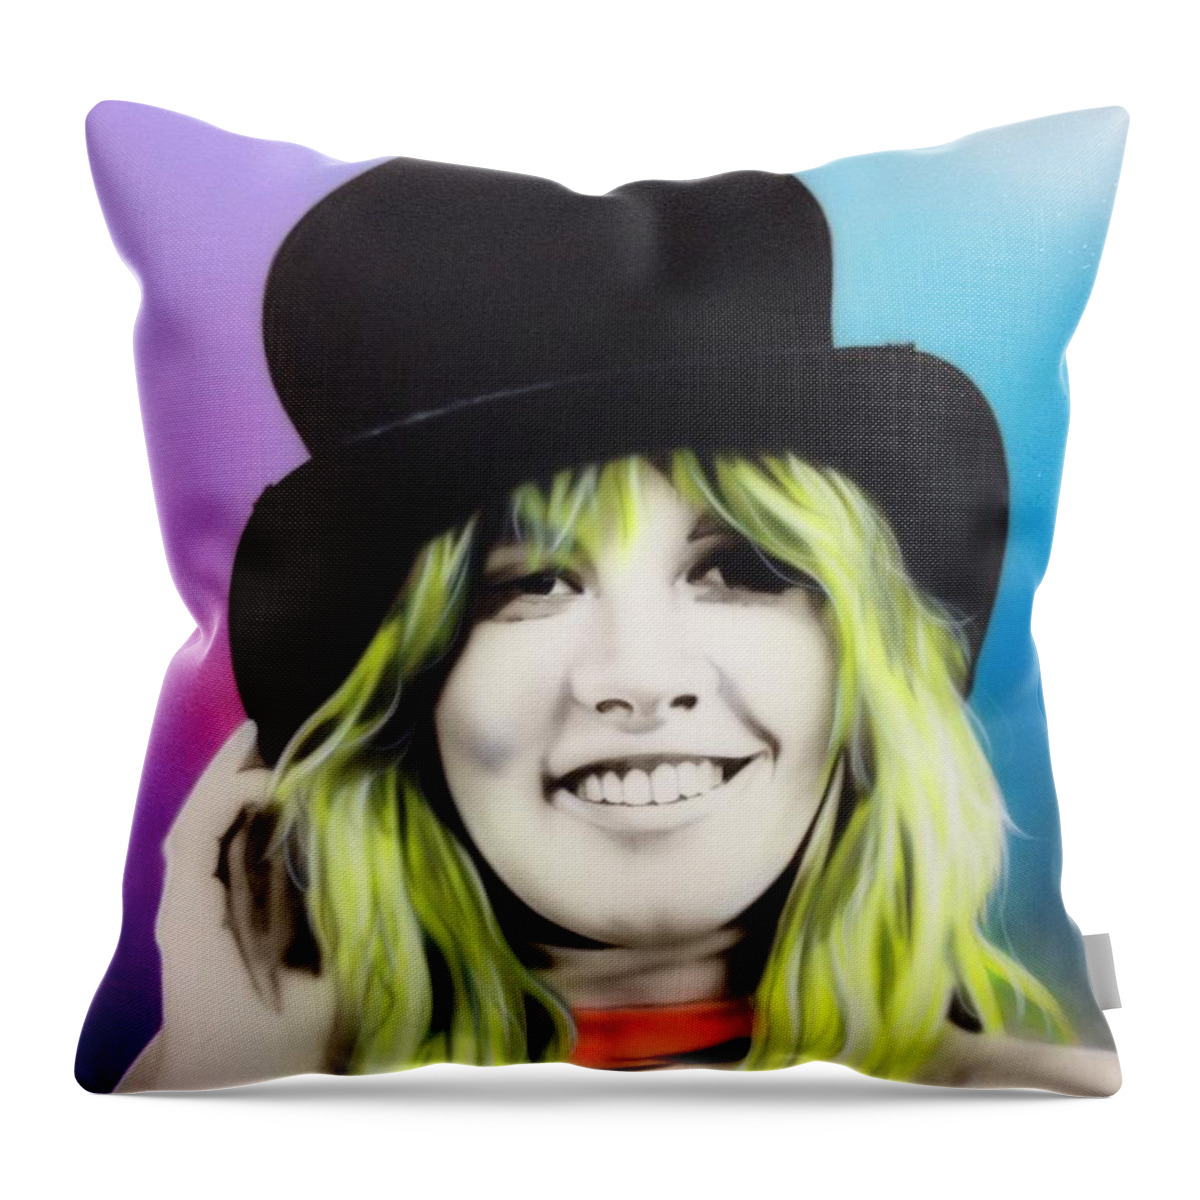 Stevie Throw Pillow featuring the painting Stevie by Christian Chapman Art